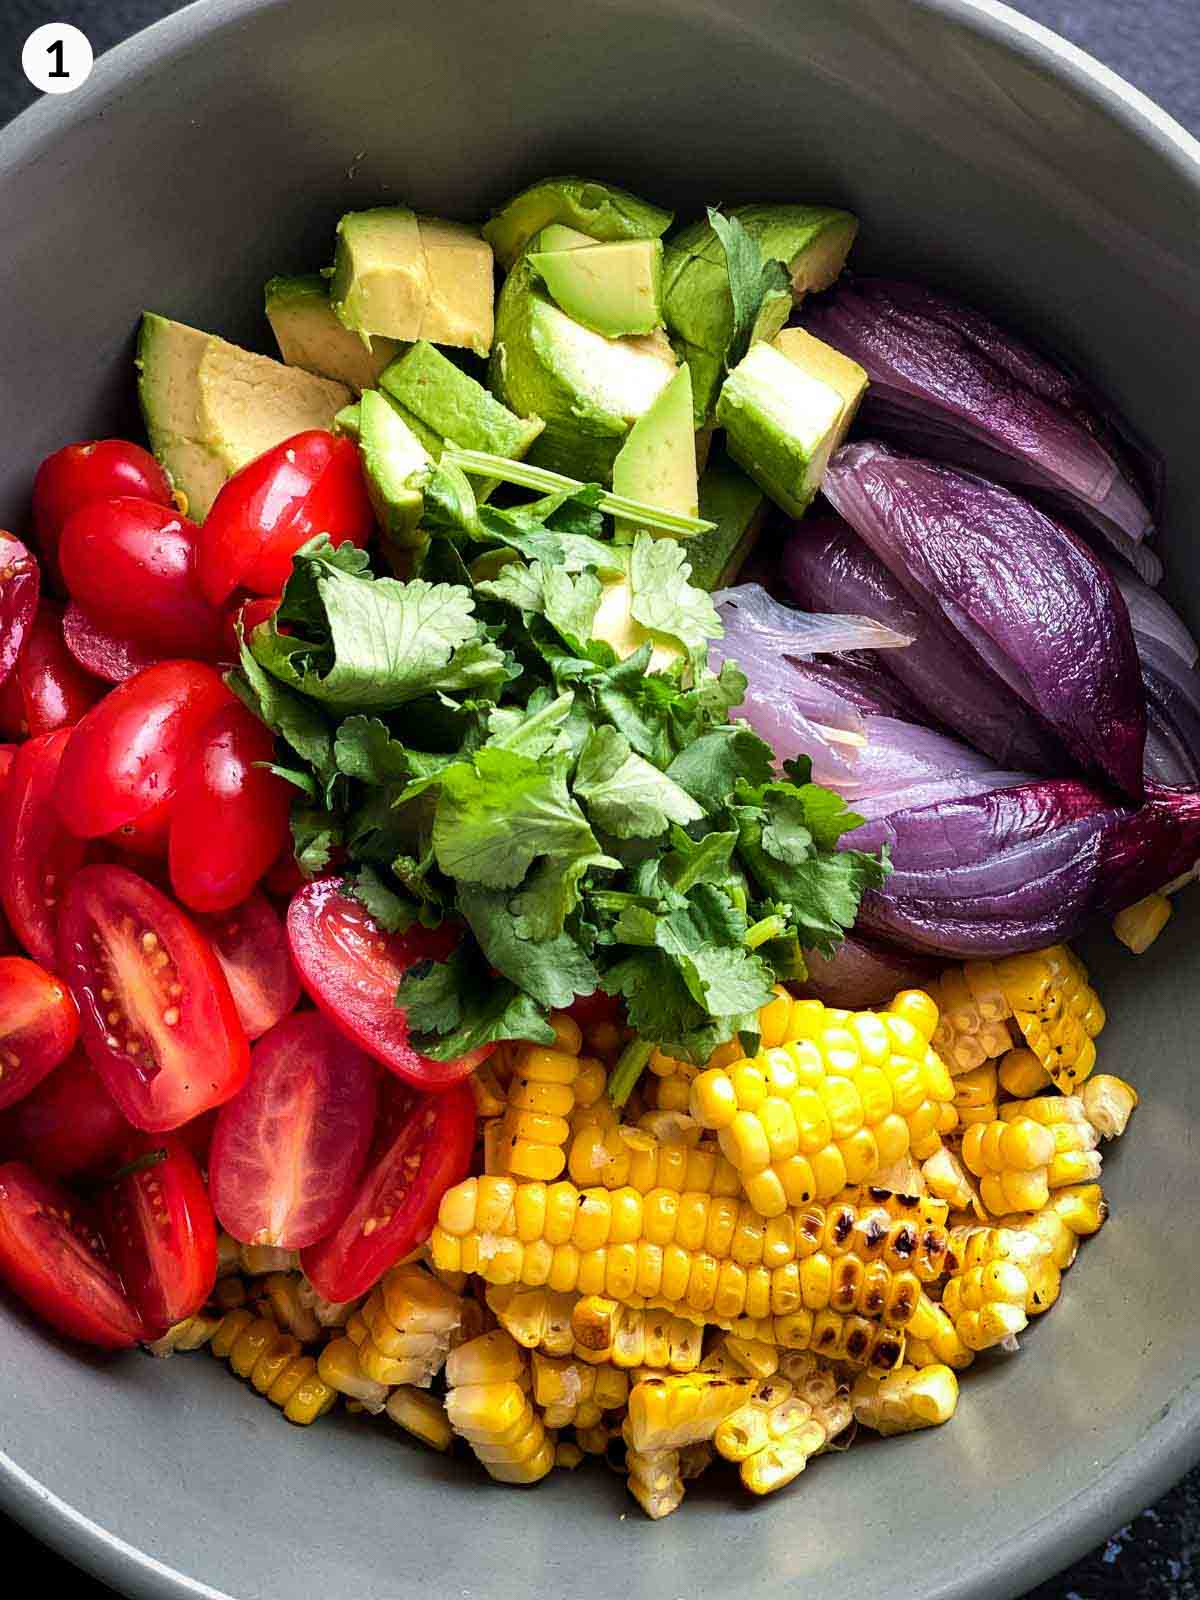 Cherry tomatoes, sliced charred corn, roasted onion wedges, avocado and coriander in a grey bowl